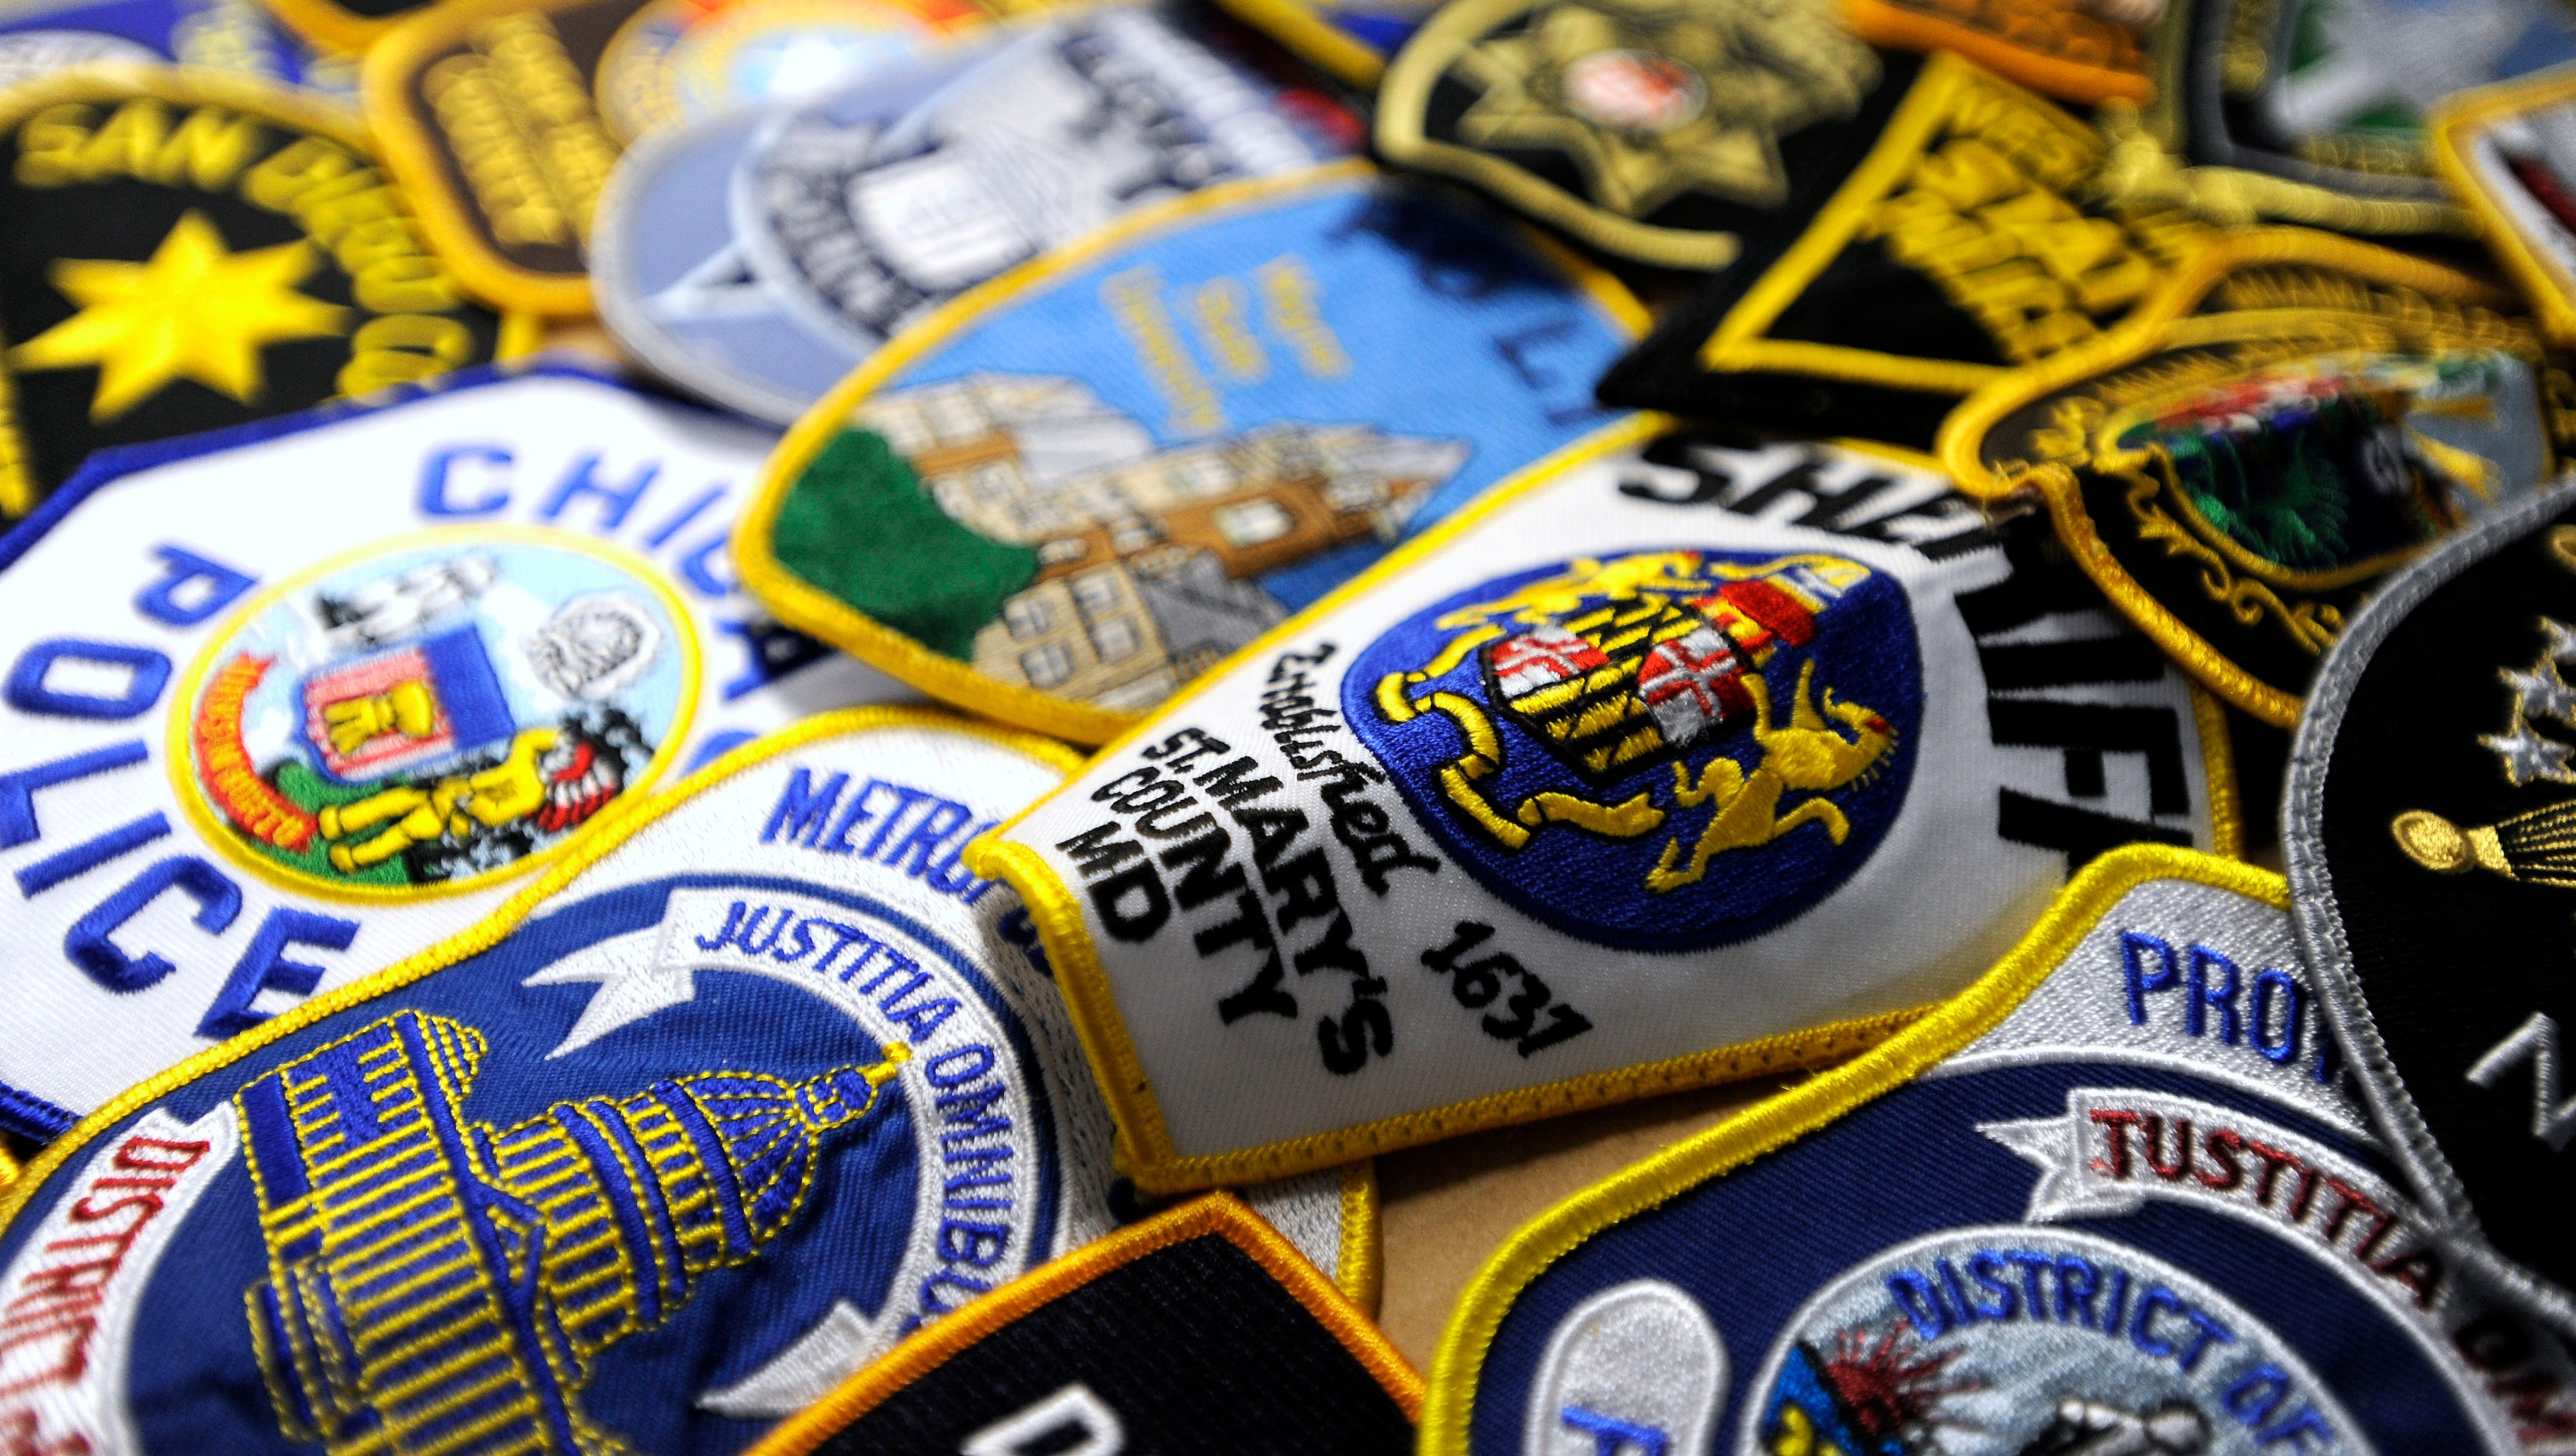 These are police shoulder patches that were given to TBL USA president and founder Andrew Jacob and vice president Pete Forhan by officers from the U.S. and Europe during their visit to Washington, D.C. for National Police Week earlier this week. One patch is from the St. Mary's County, Maryland Sheriff's Office that was established in 1637, one of the first sheriff's departments in the U.S.